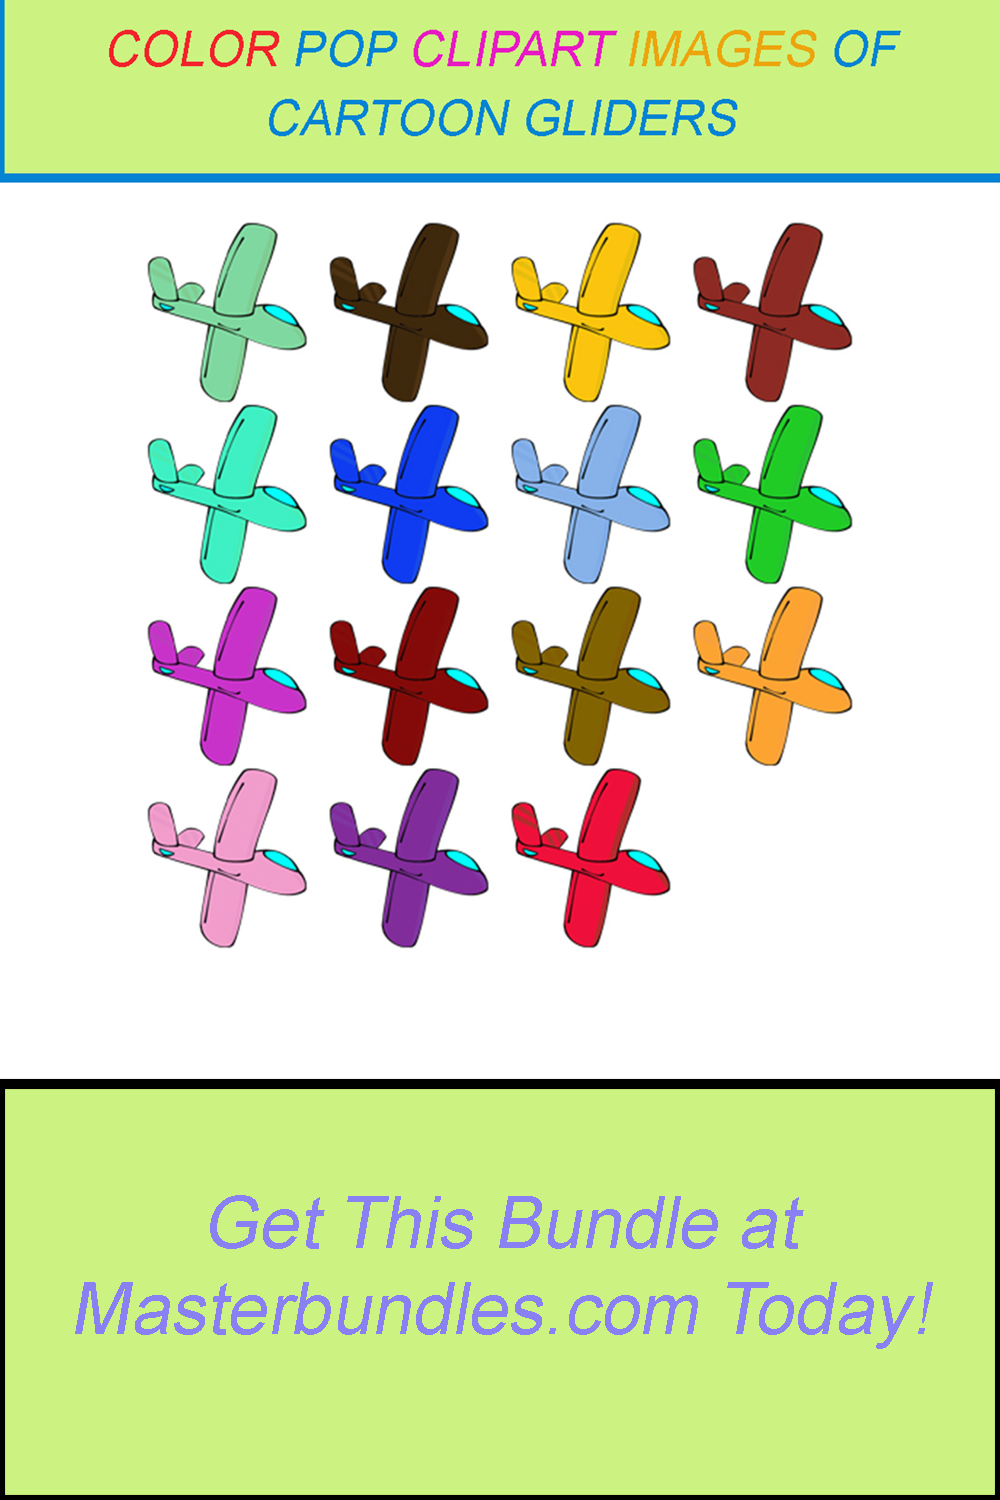 15 COLOR POP CLIPART IMAGES OF CARTOON GLIDERS pinterest preview image.